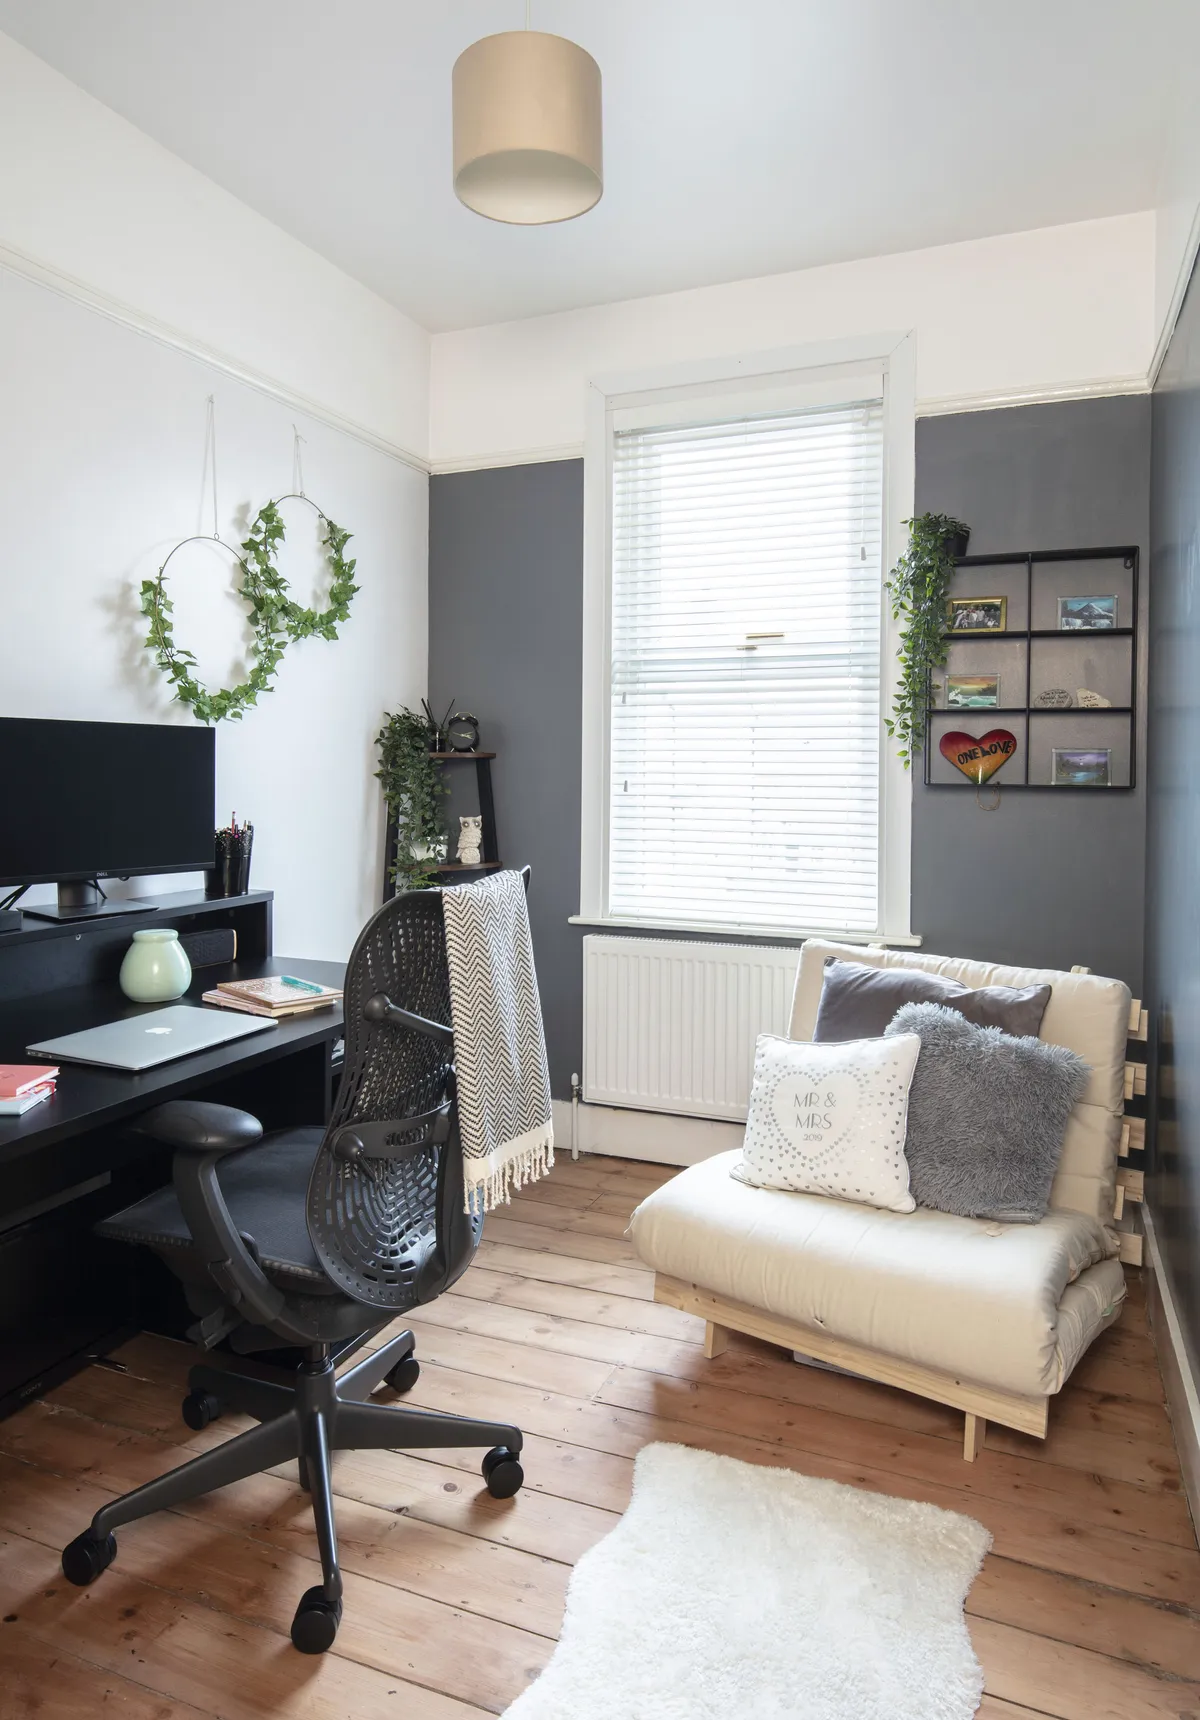 Samuel stripped back the floor in Diandra’s home office to reveal stunning original floorboards. Diandra plans to add orange tones to energise the space now she’s working from home full-time